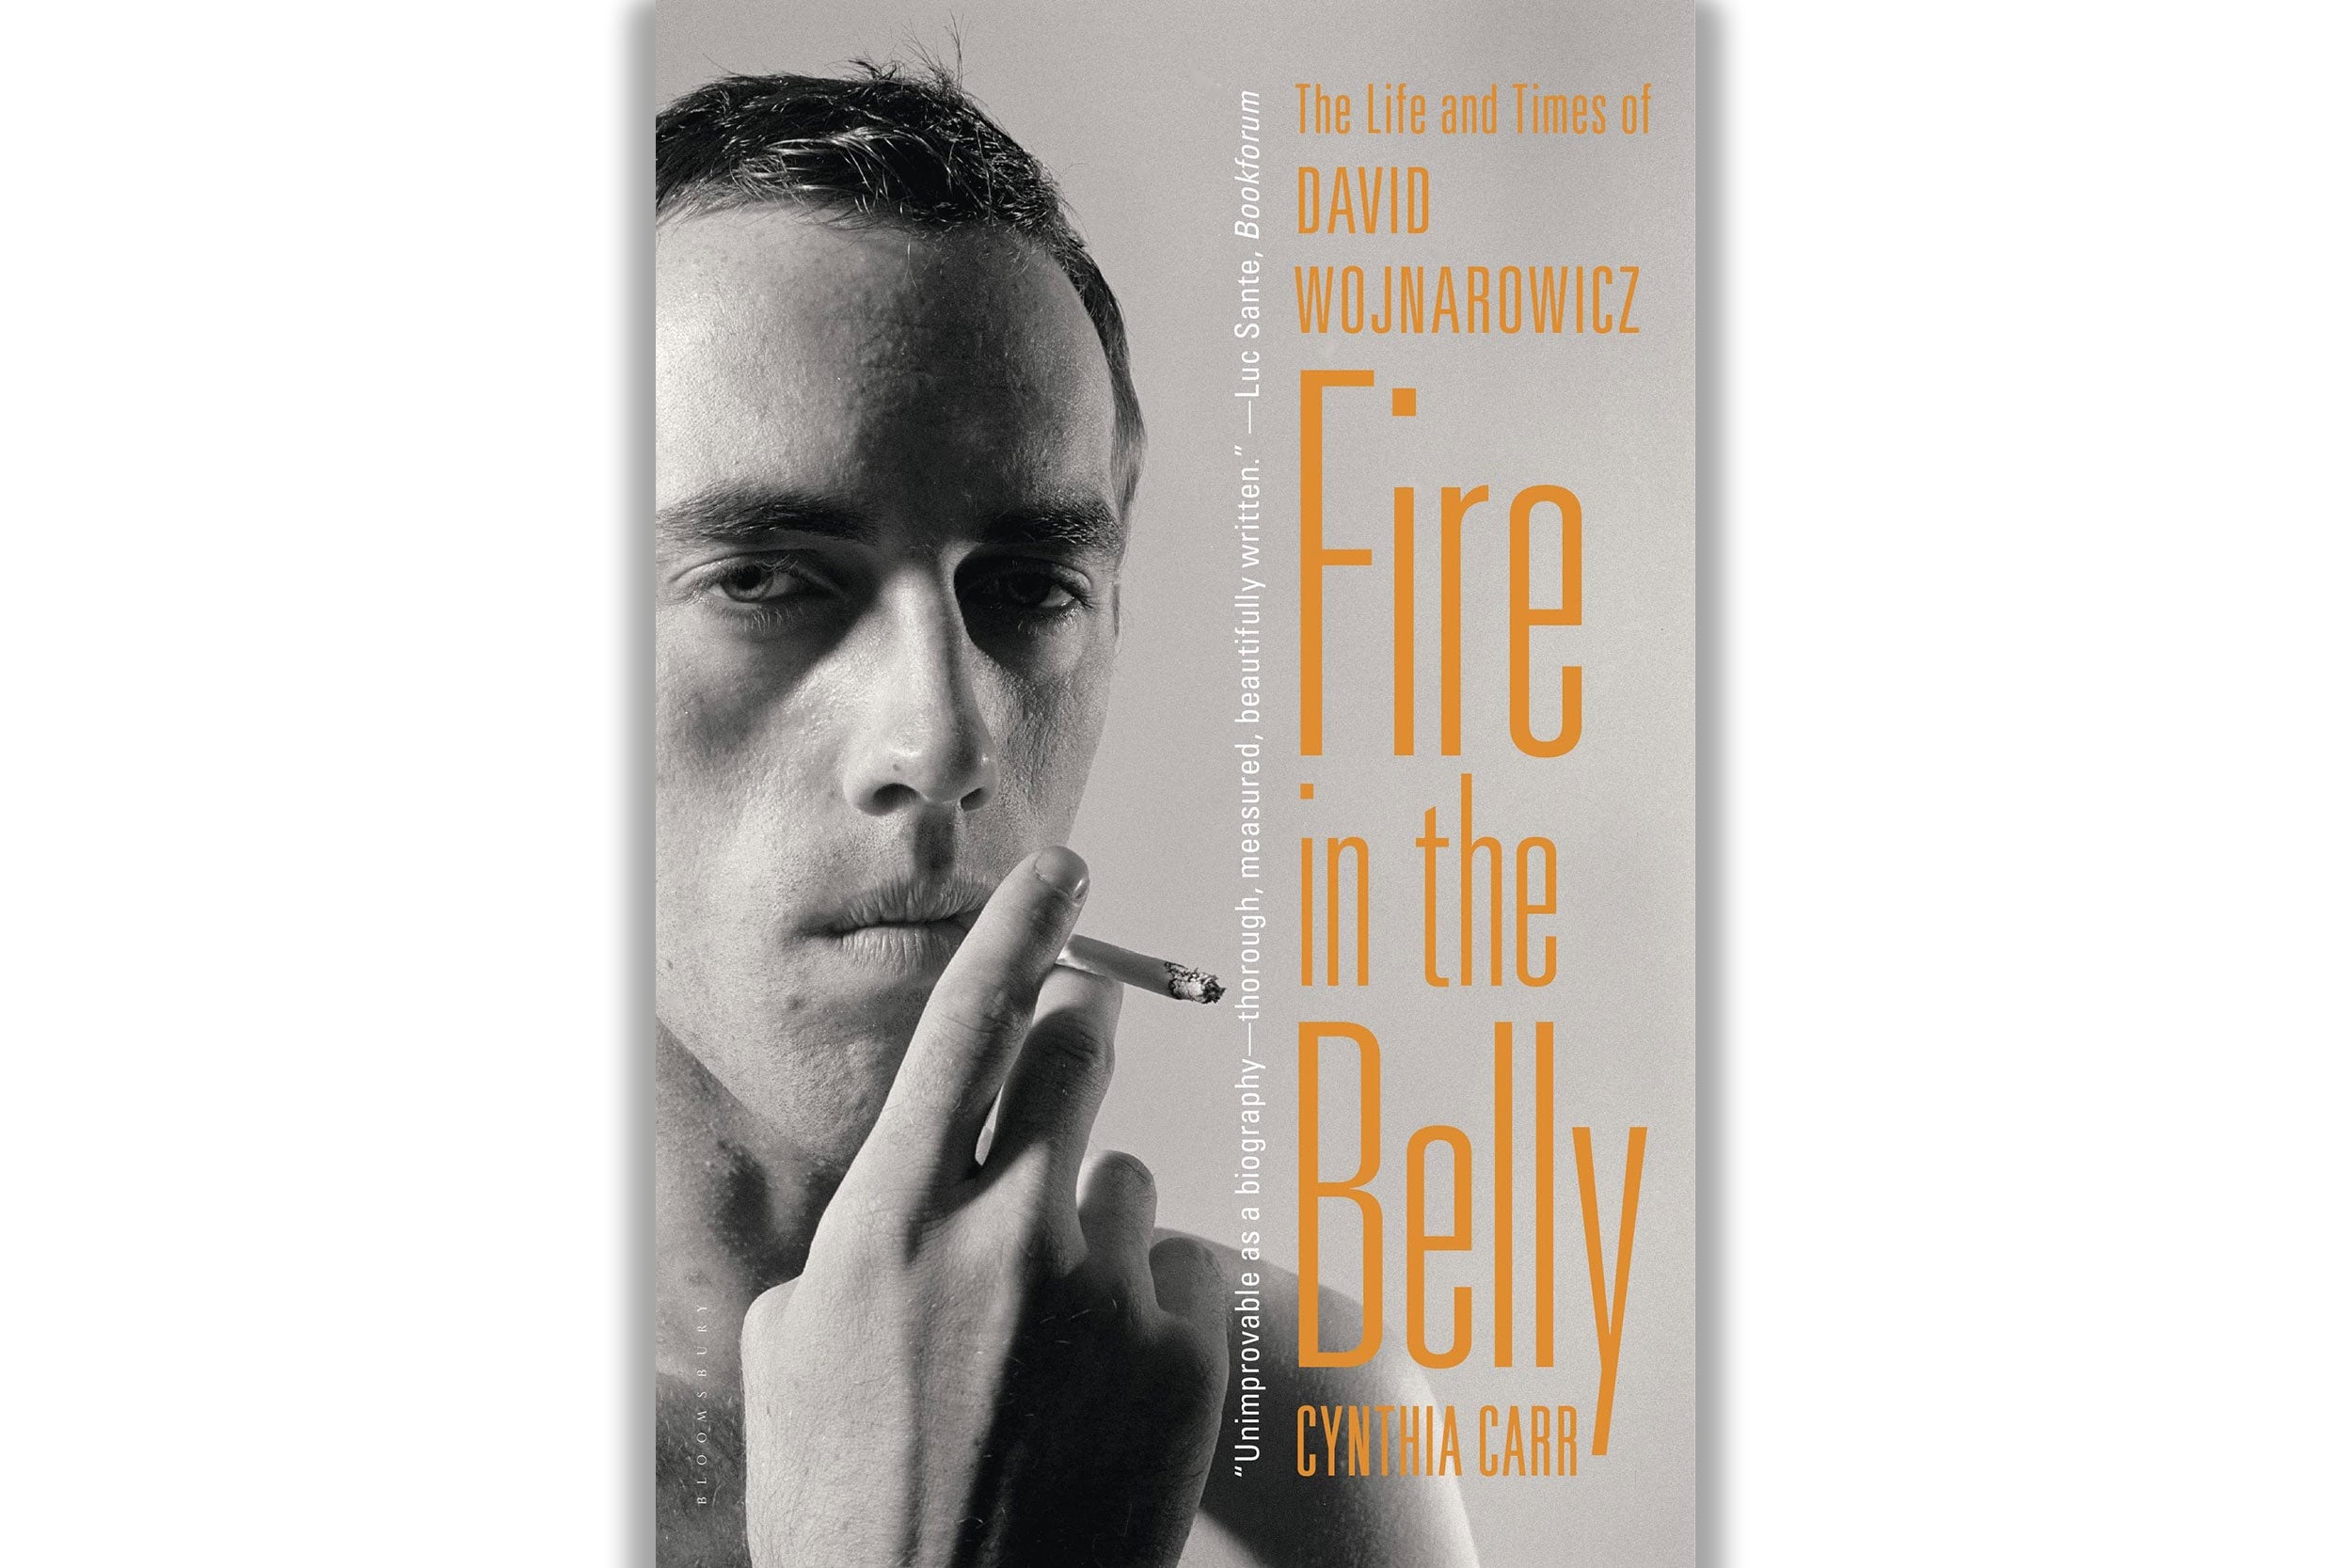 Fire in the Belly,’ Cynthia Carr’s towering biography of the artist David Wojnarowicz.